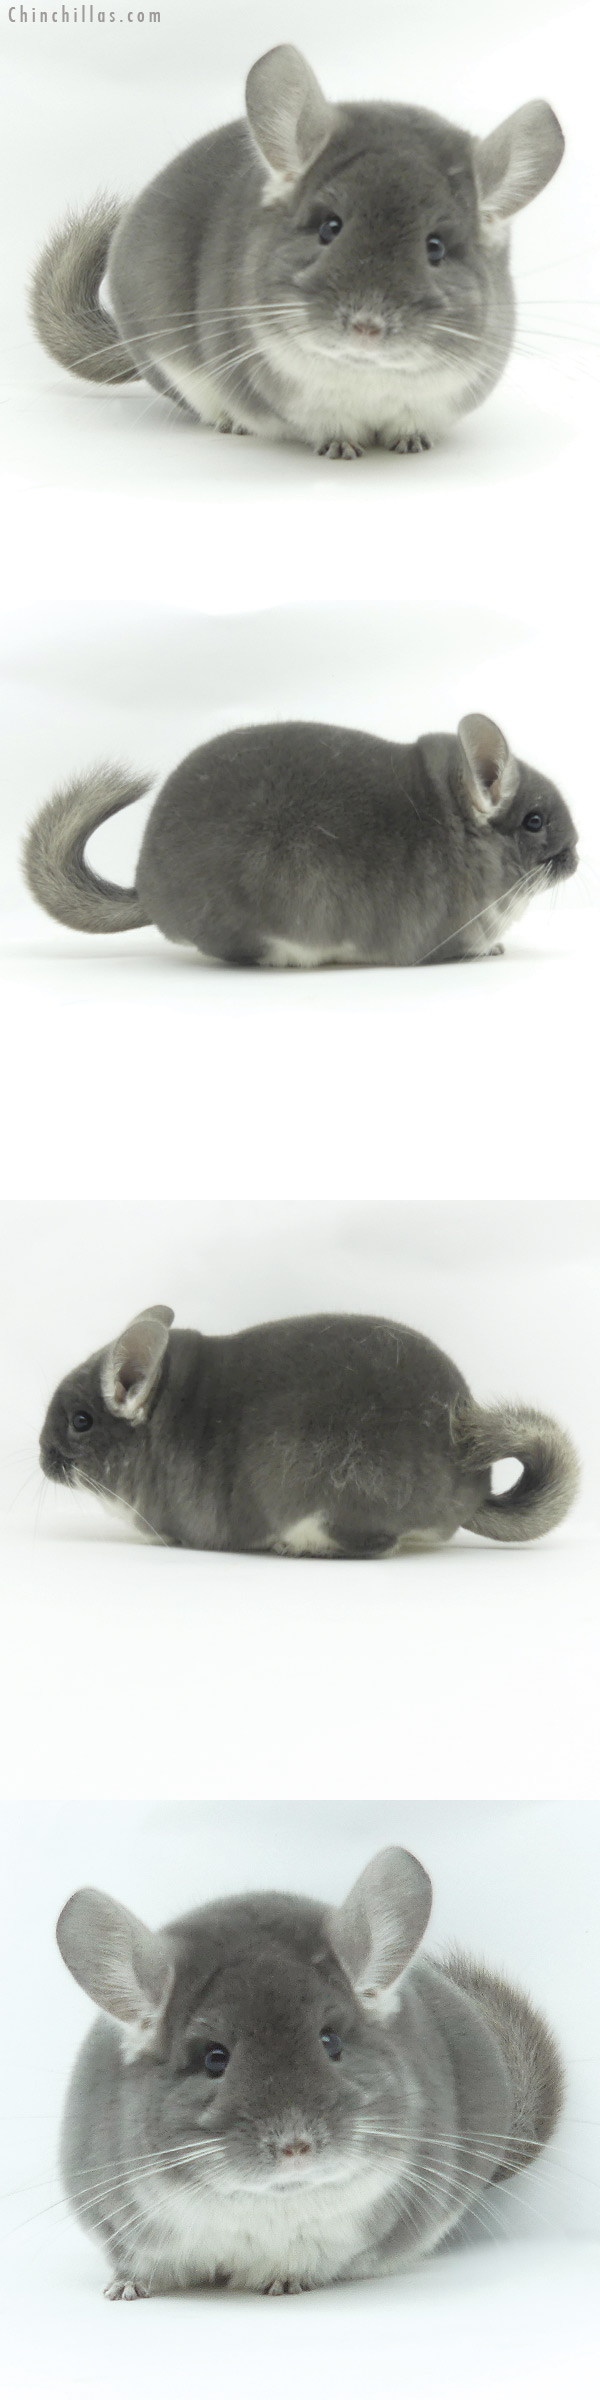 Chinchilla or related item offered for sale or export on Chinchillas.com - 20156 Premium Production Quality TOV Violet Female Chinchilla